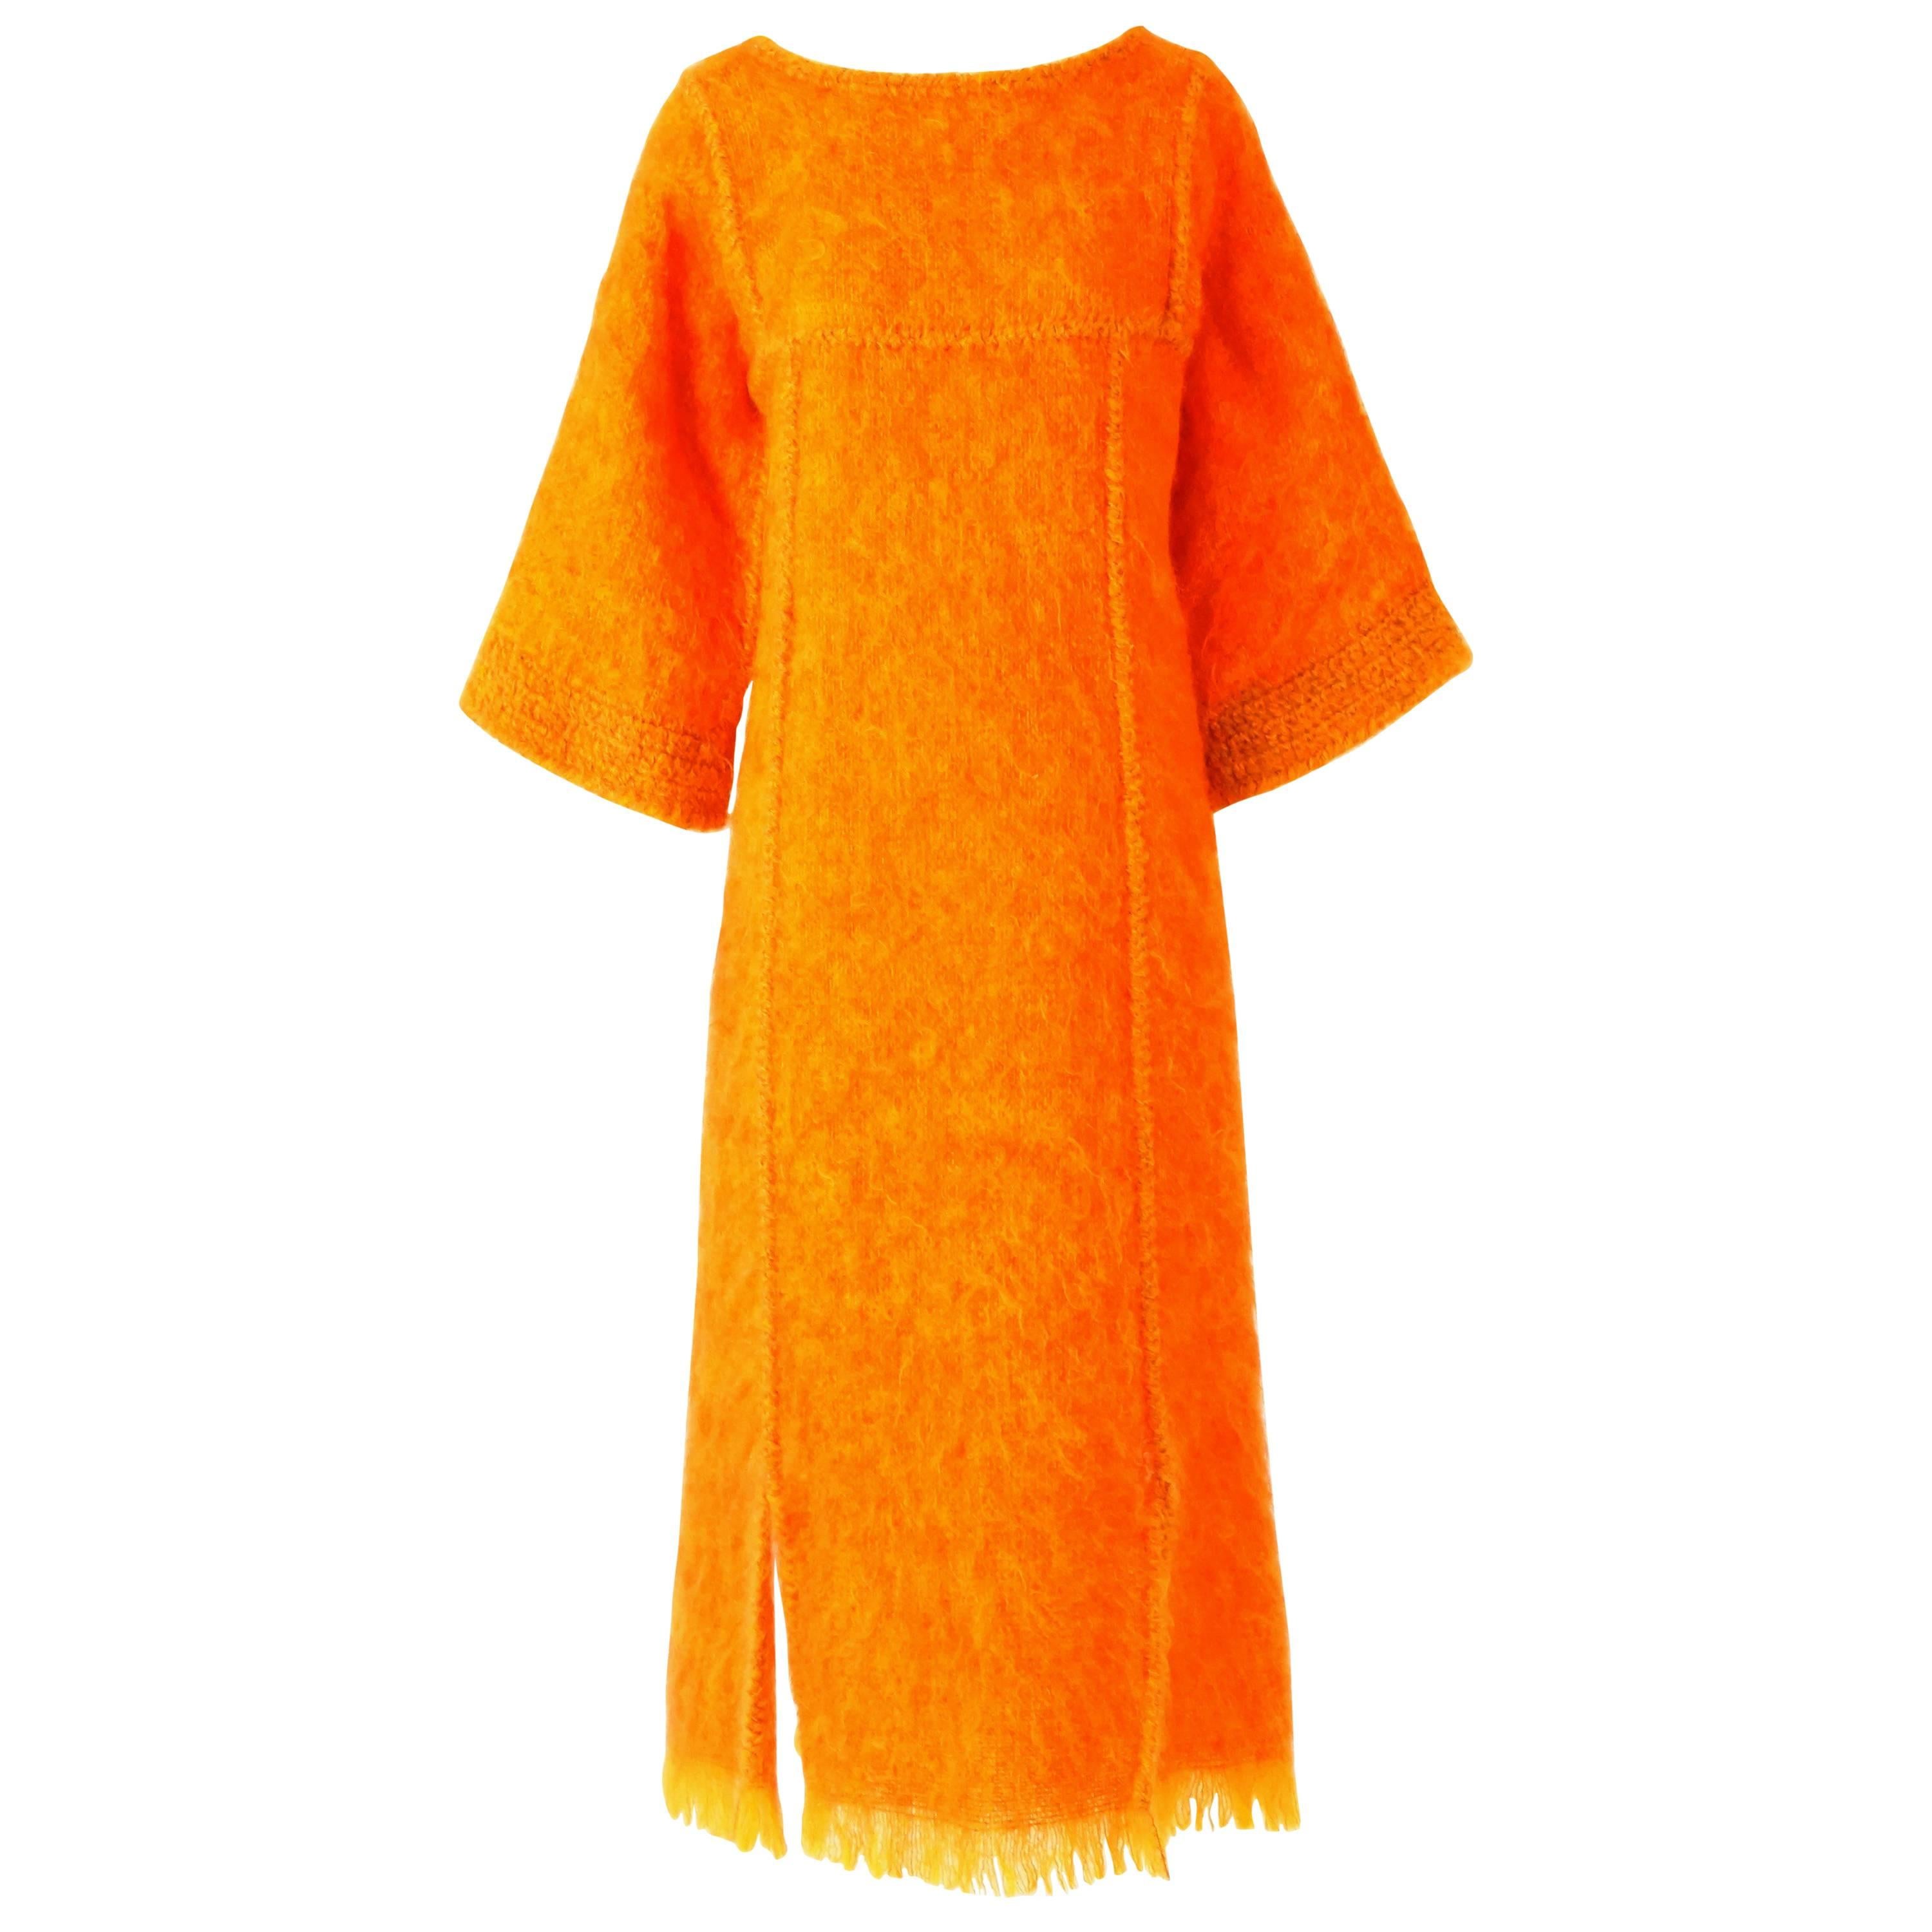 Jacque d'Aubres Hand Made Mohair Caftan Dress in Tangerine For Sale